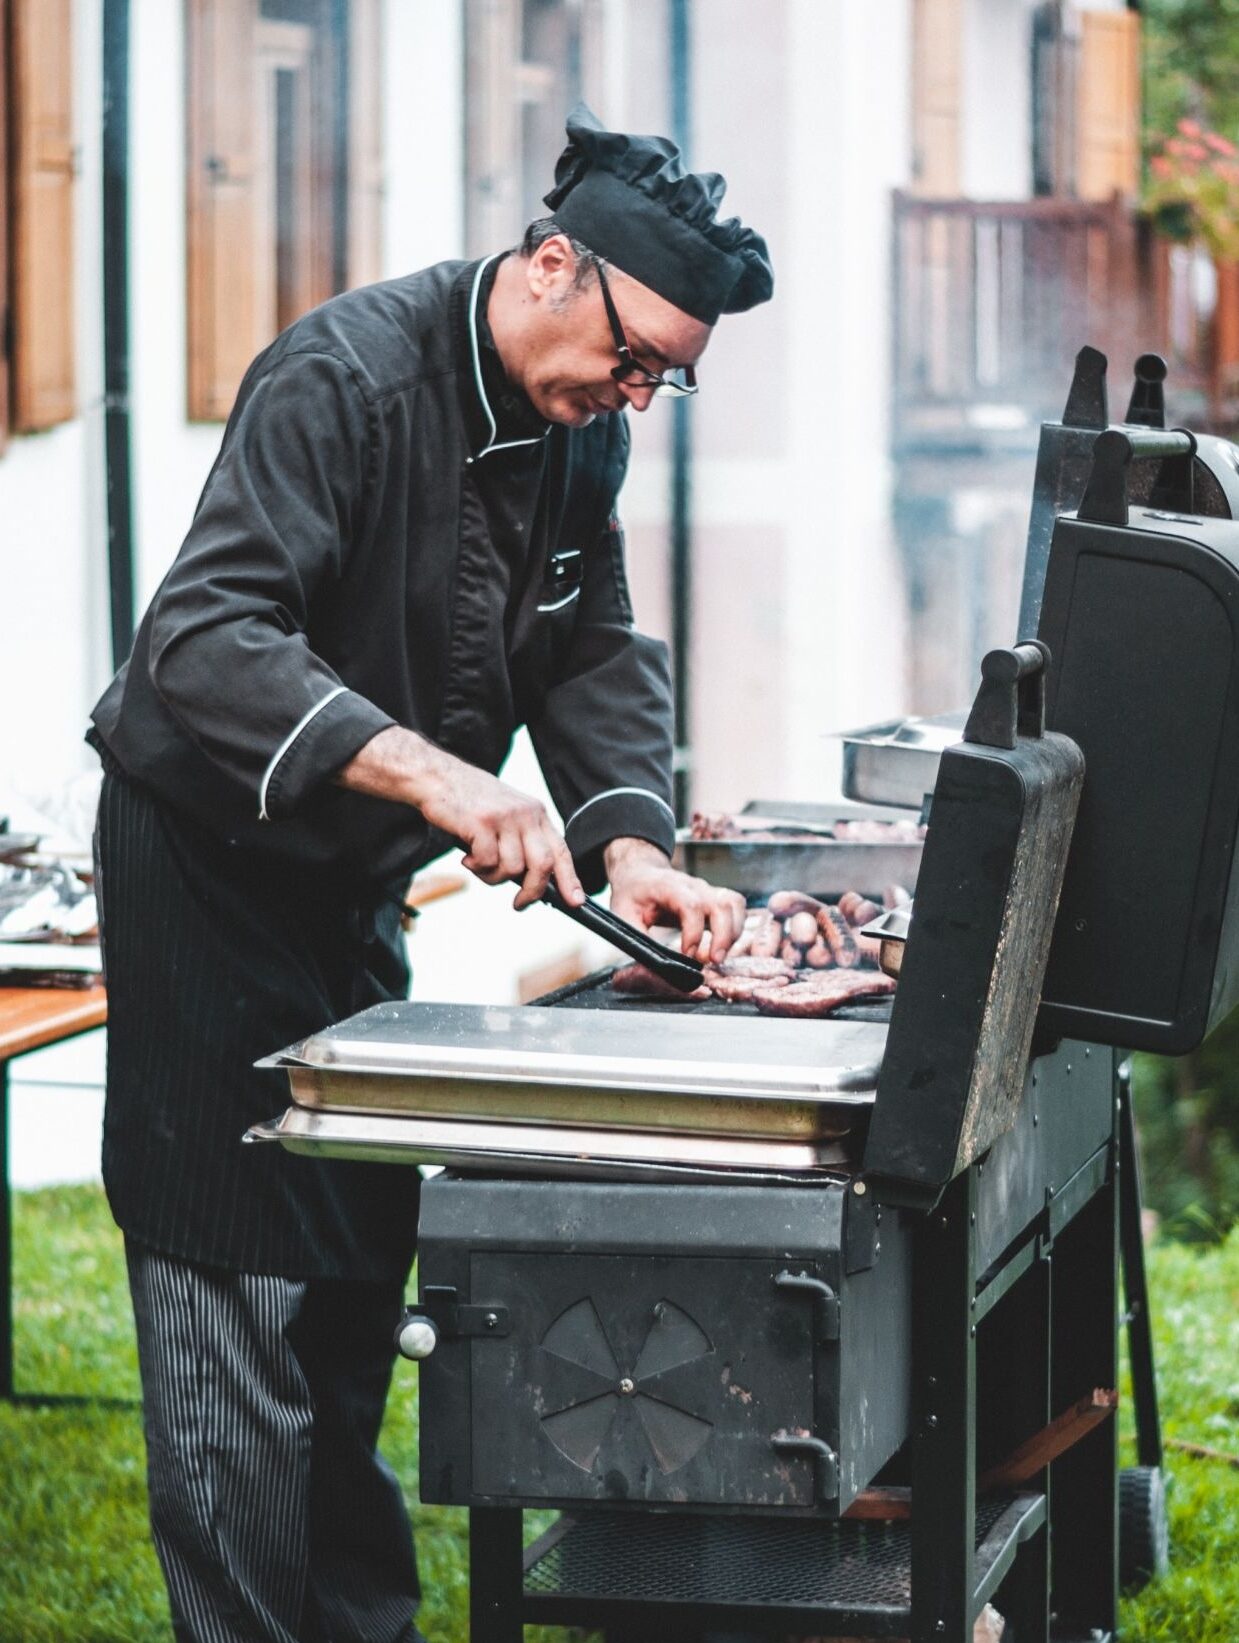 Barbecue stand at an outdoor party